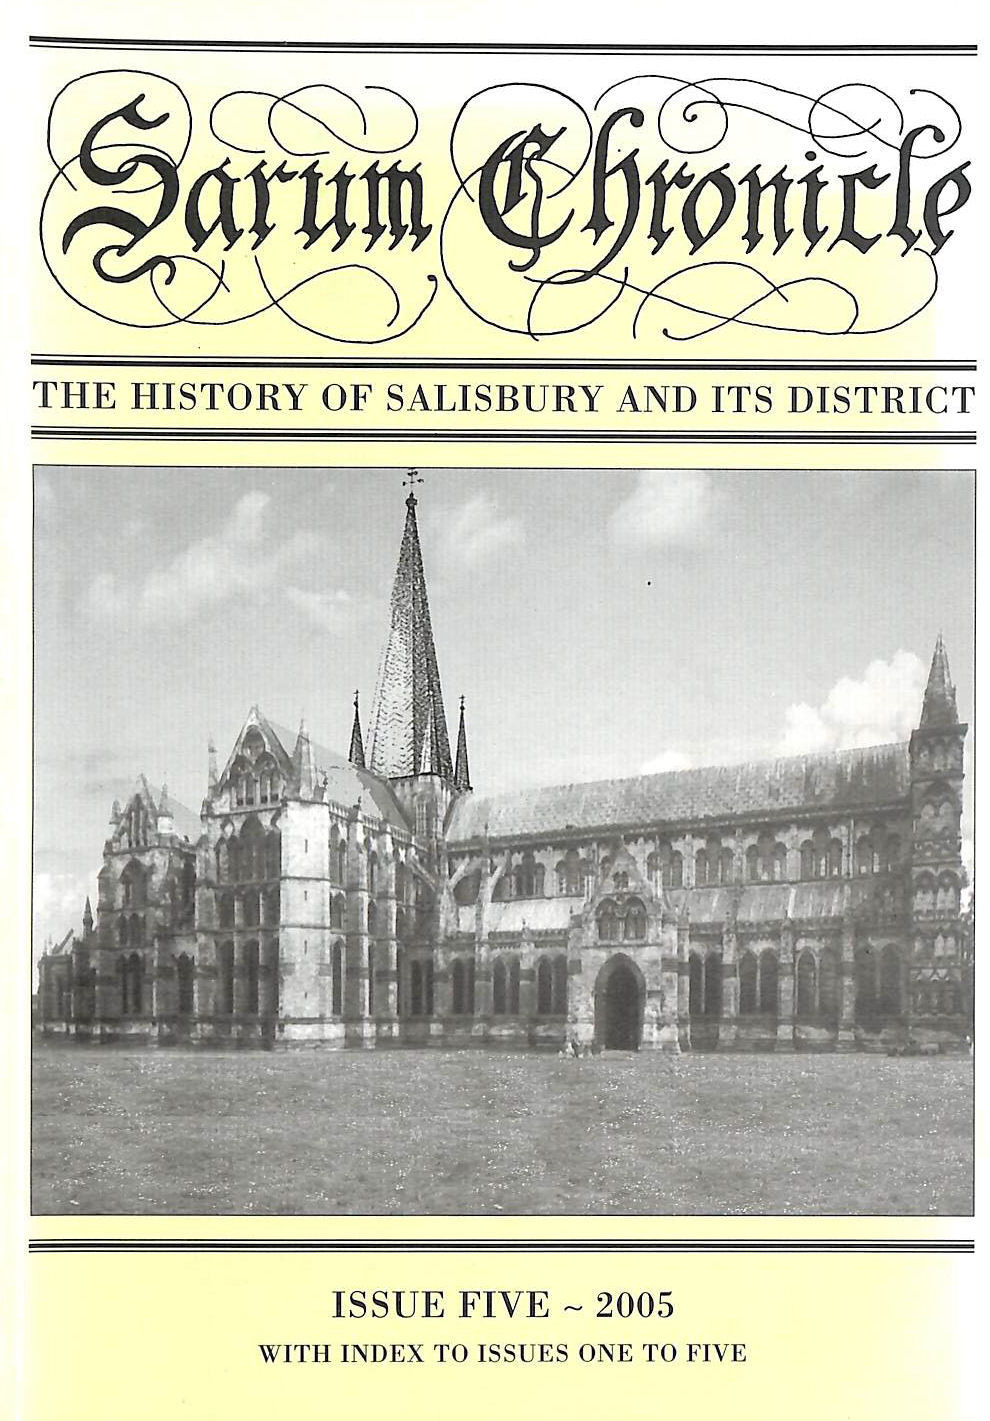 SARUM CHRONICLE - Sarum Chronicle: The History of Salisbury and Its District: Issue 5